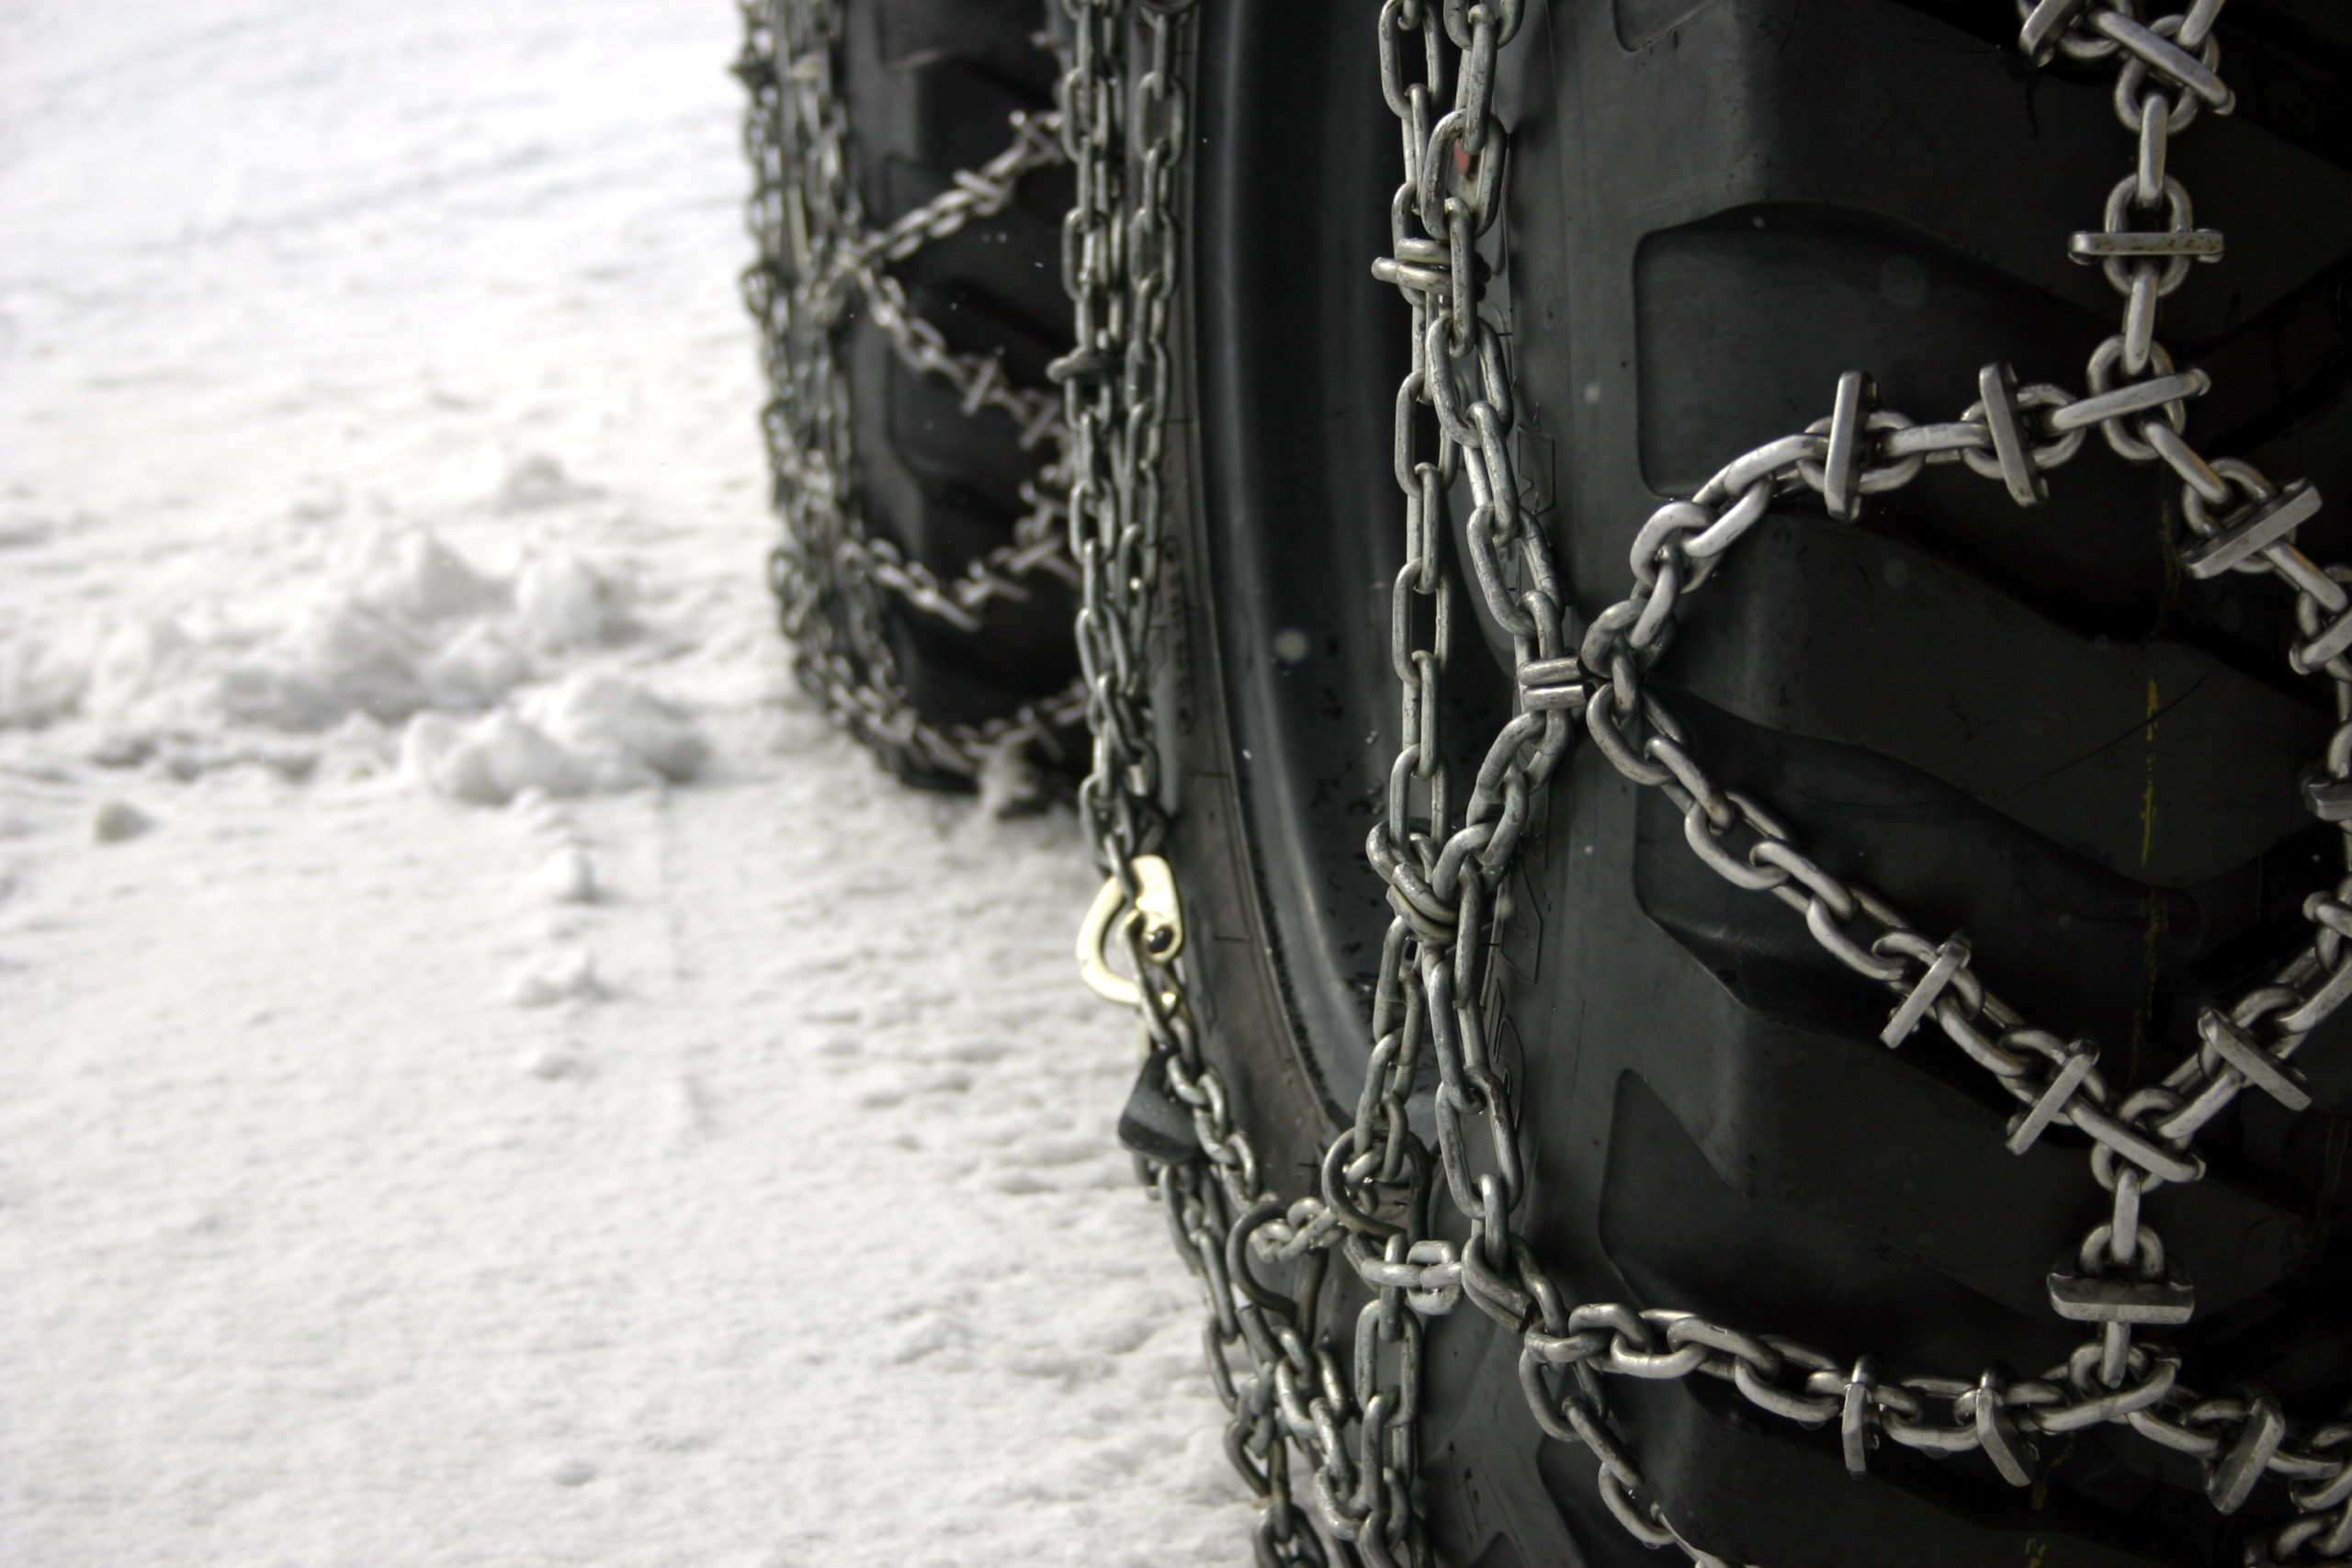 How to Put Snow Chains on Semi-Truck Tires